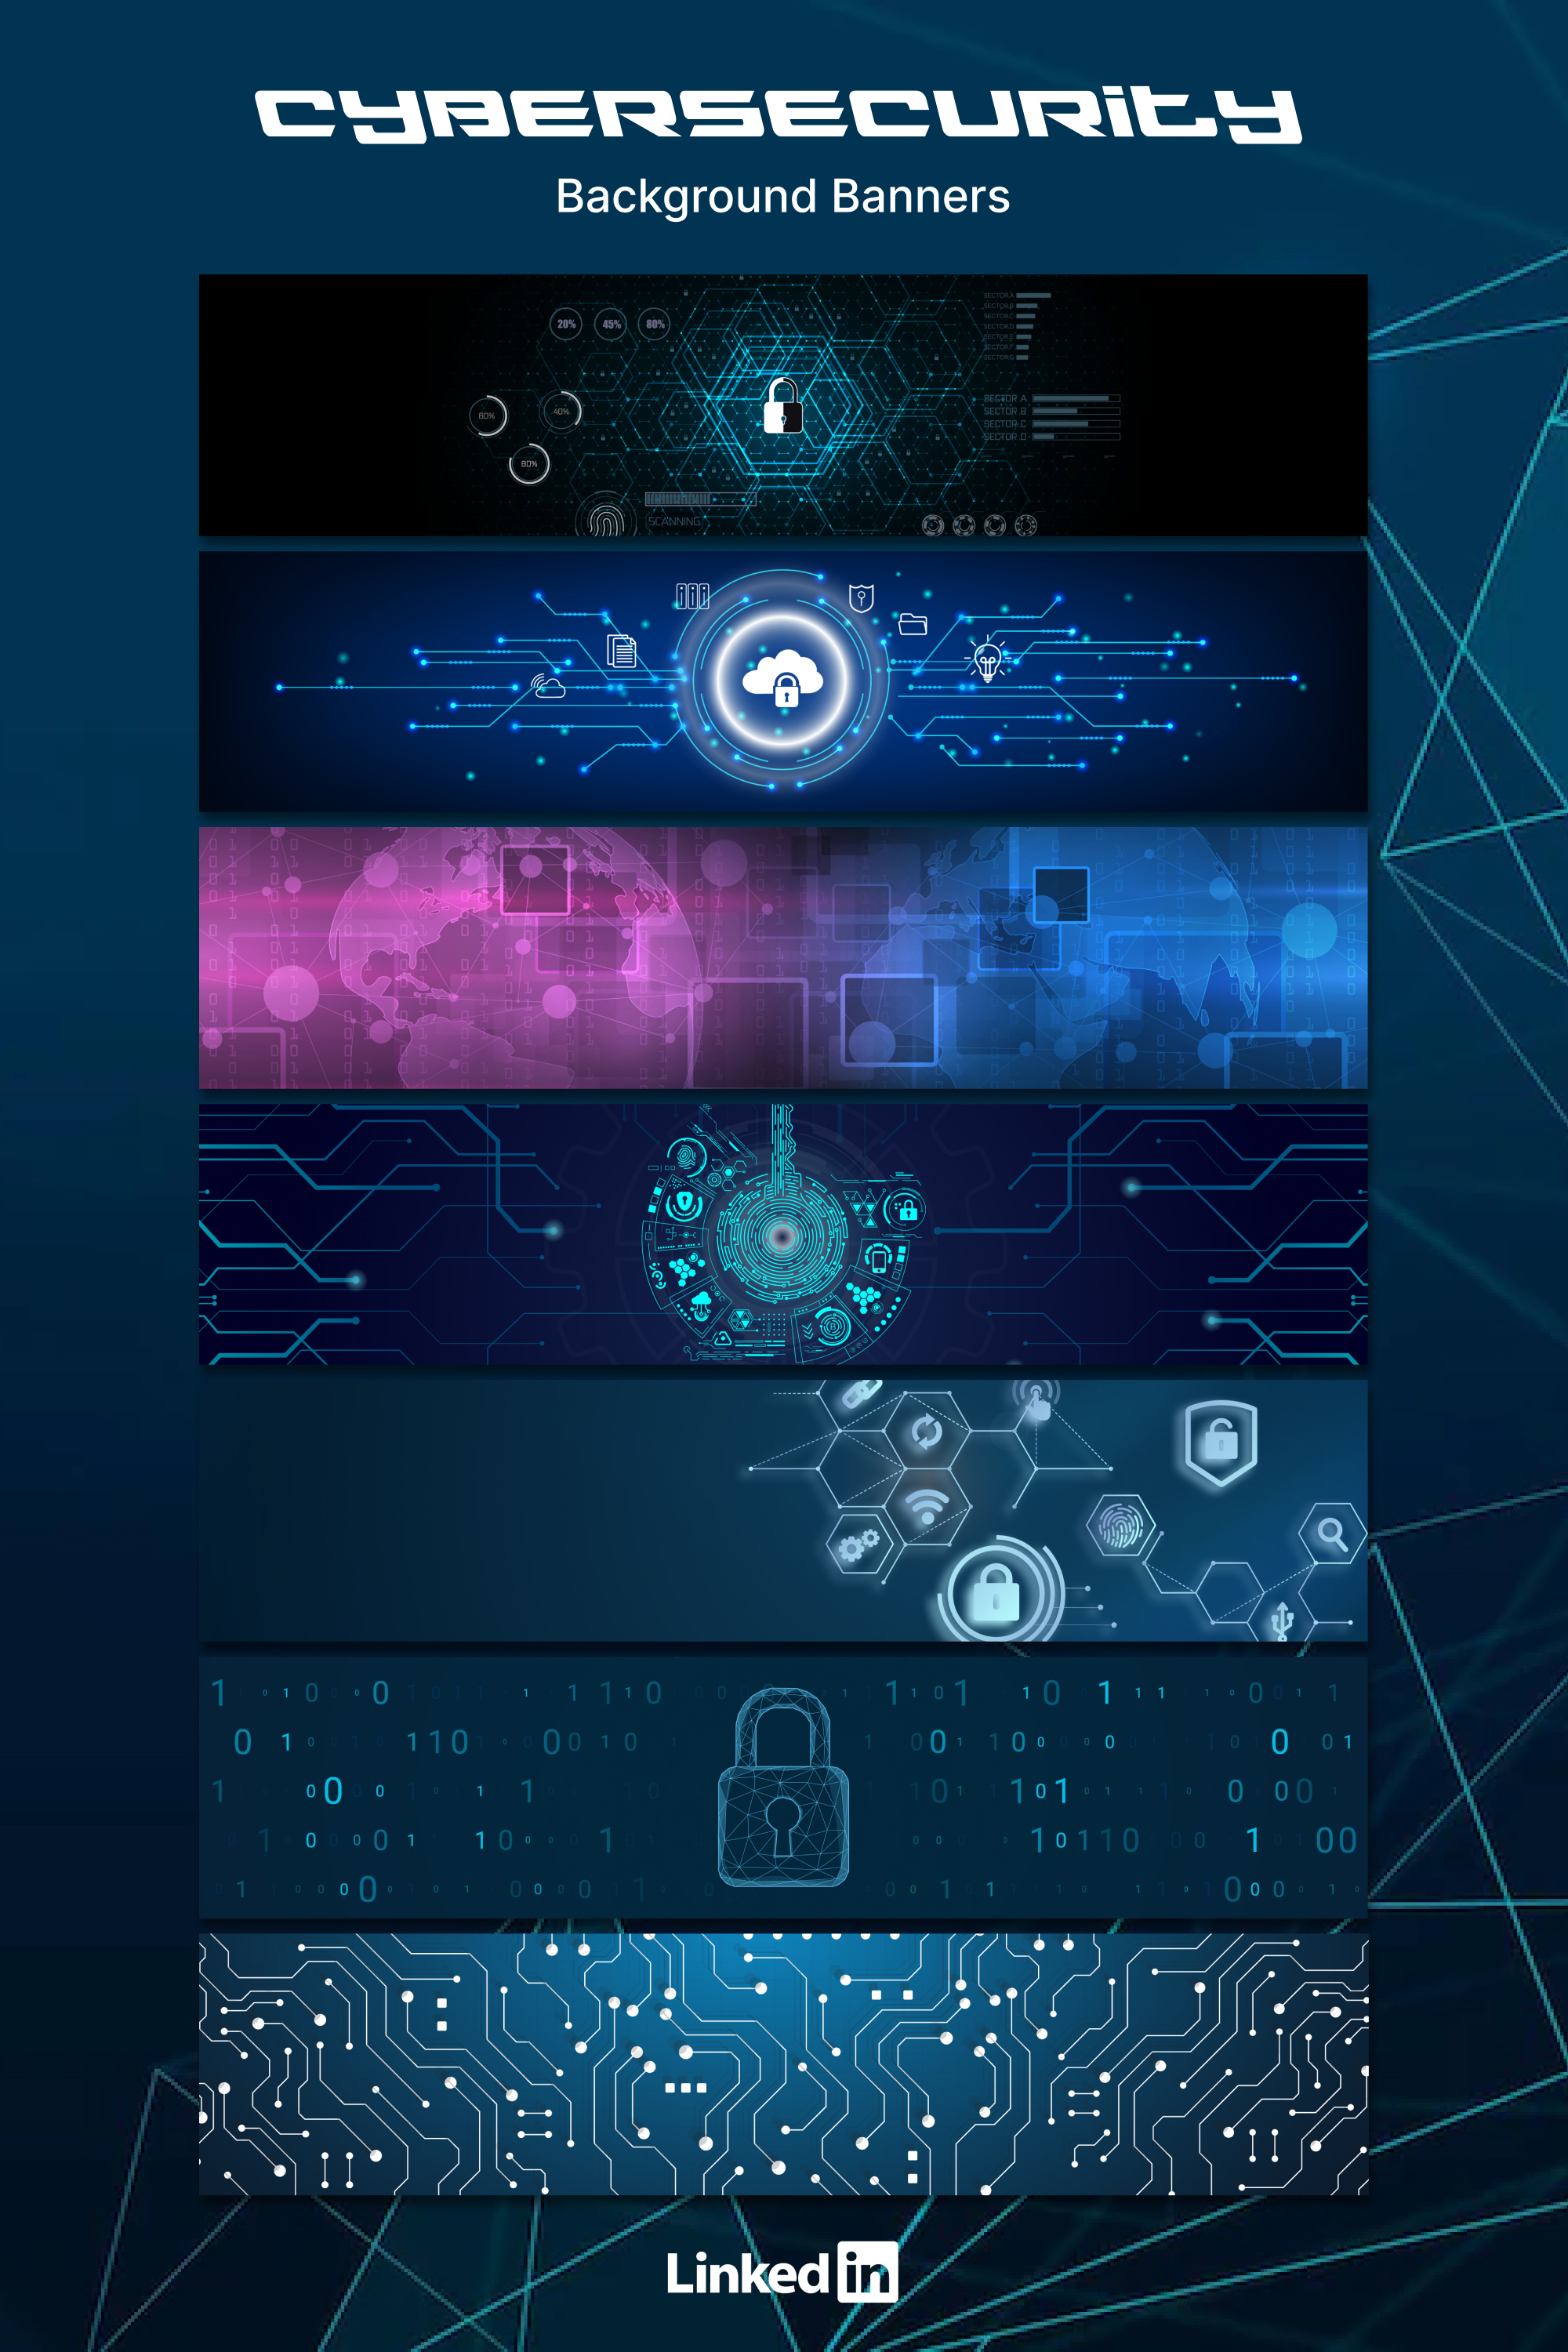 Linkedin cybersecurity background banners of pinterest.